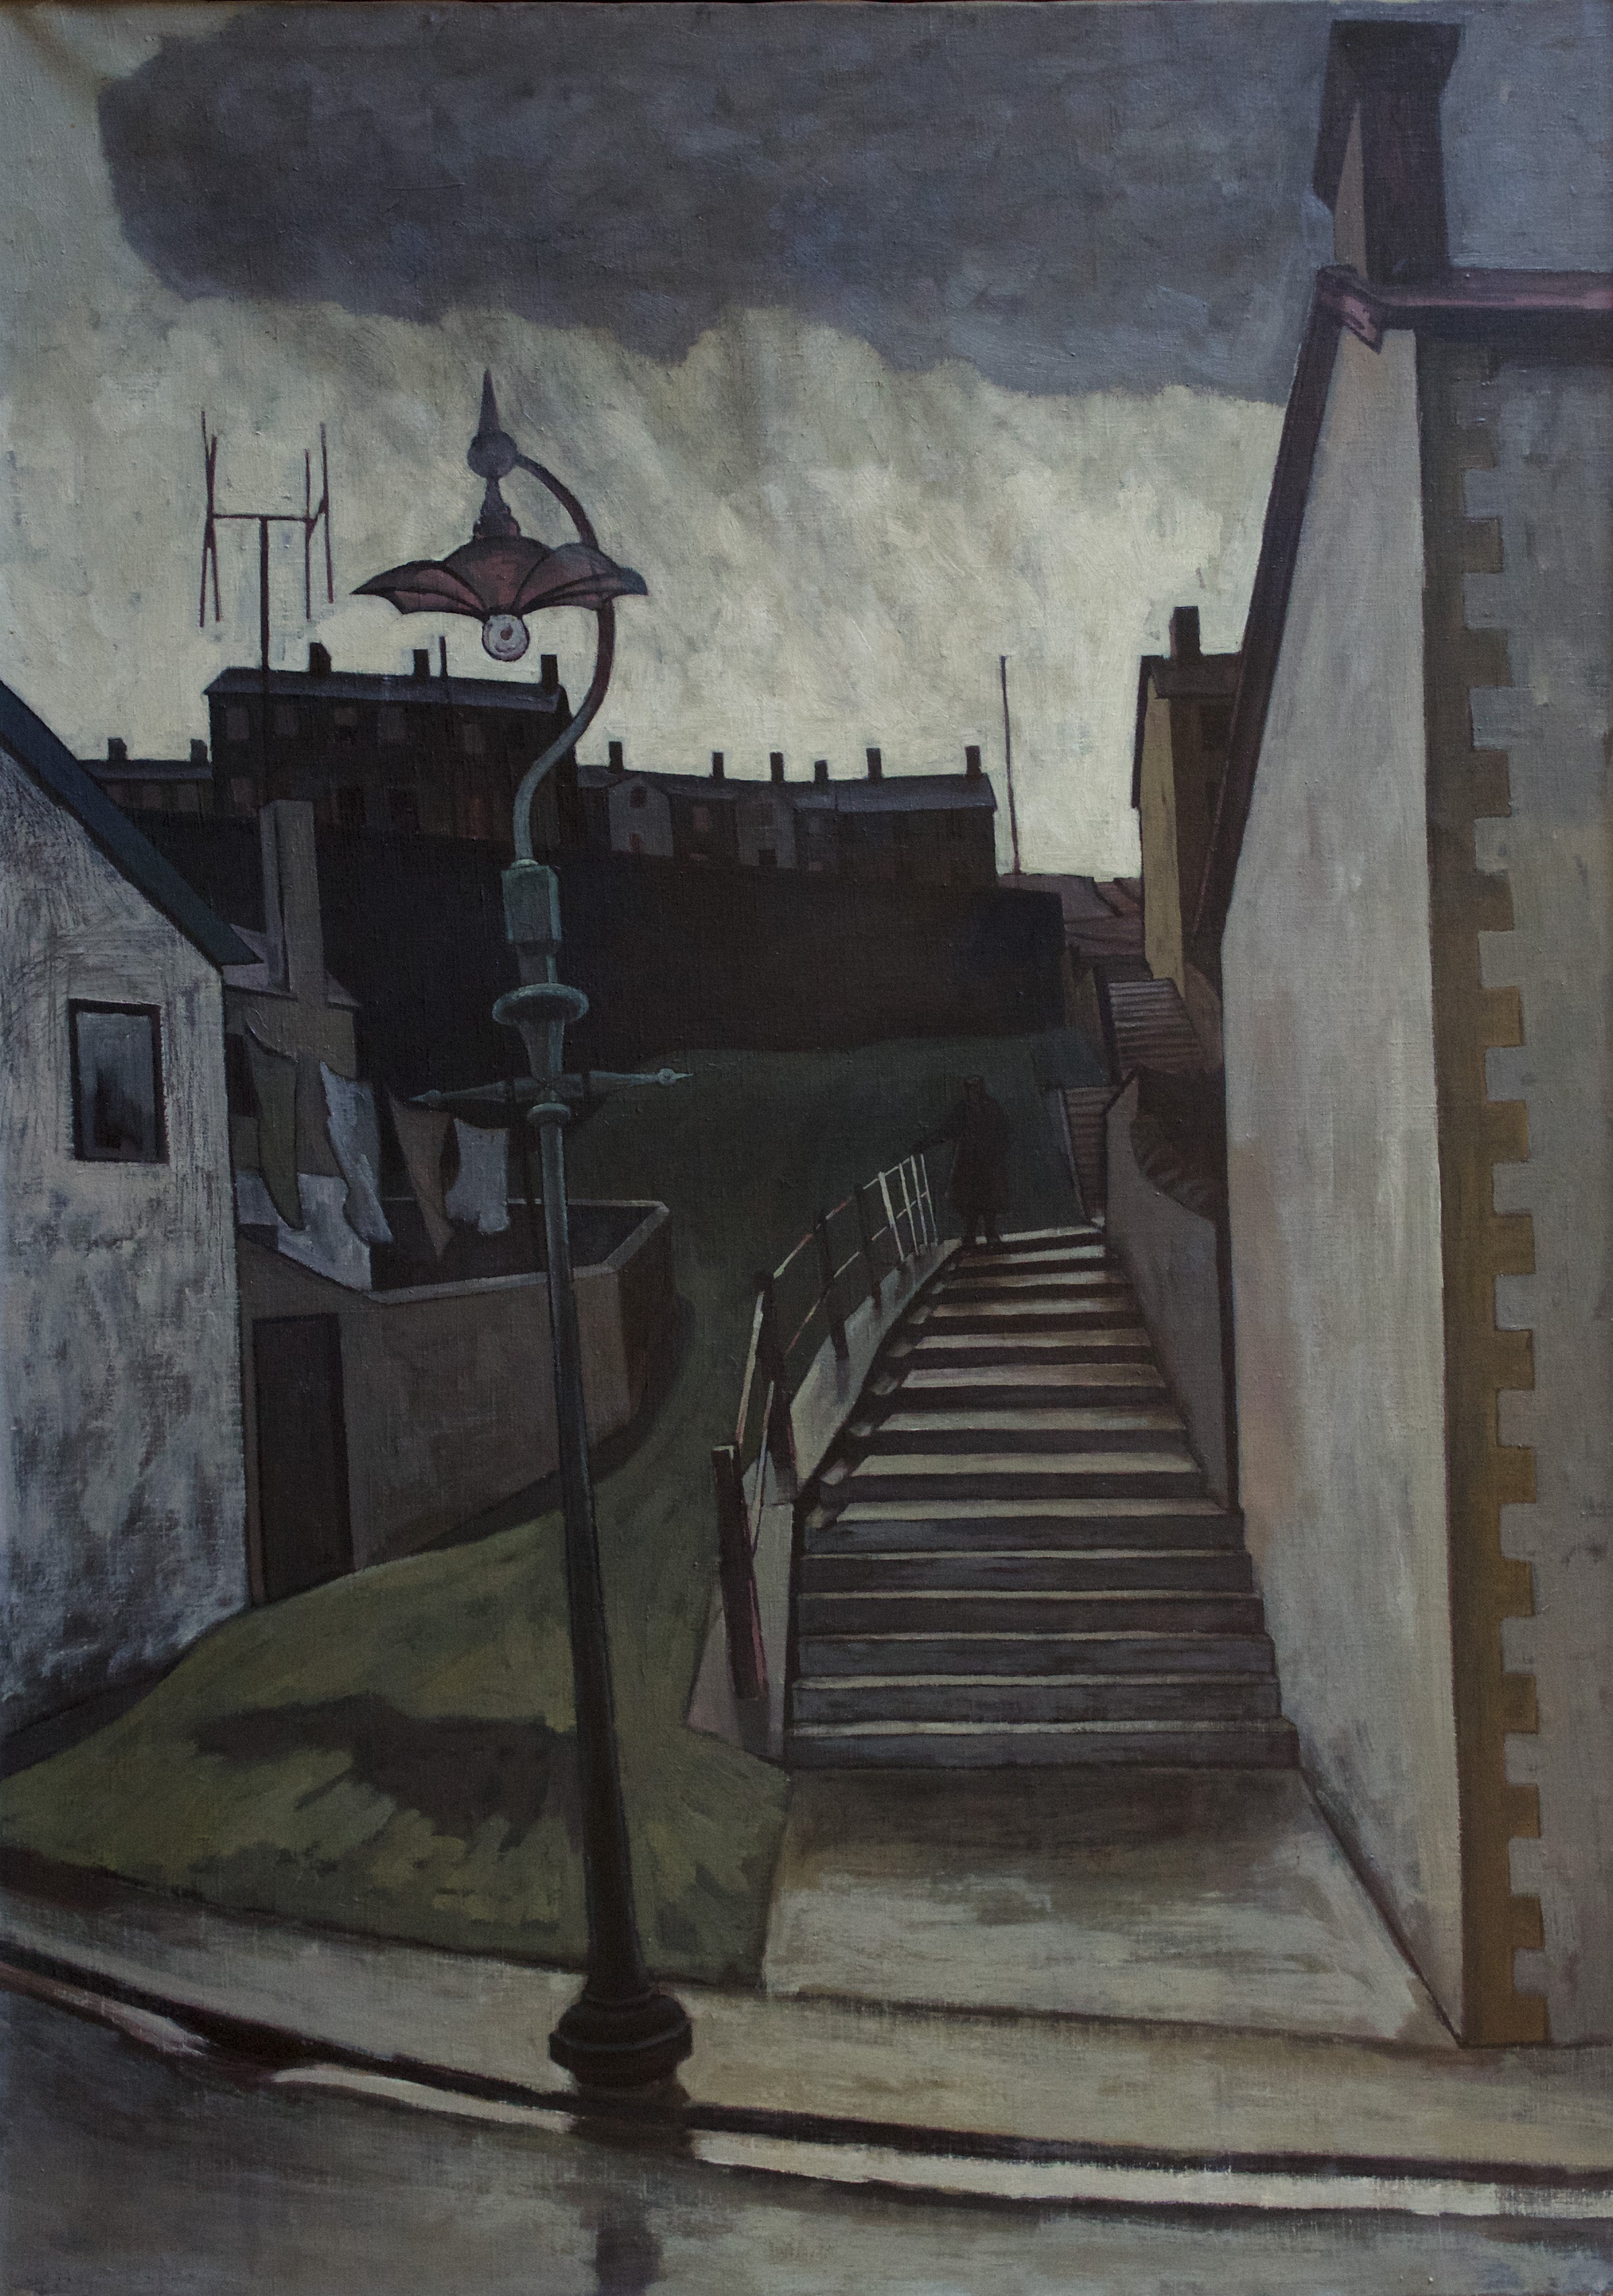 George Chapman, The Steps, oil on canvas, 1958